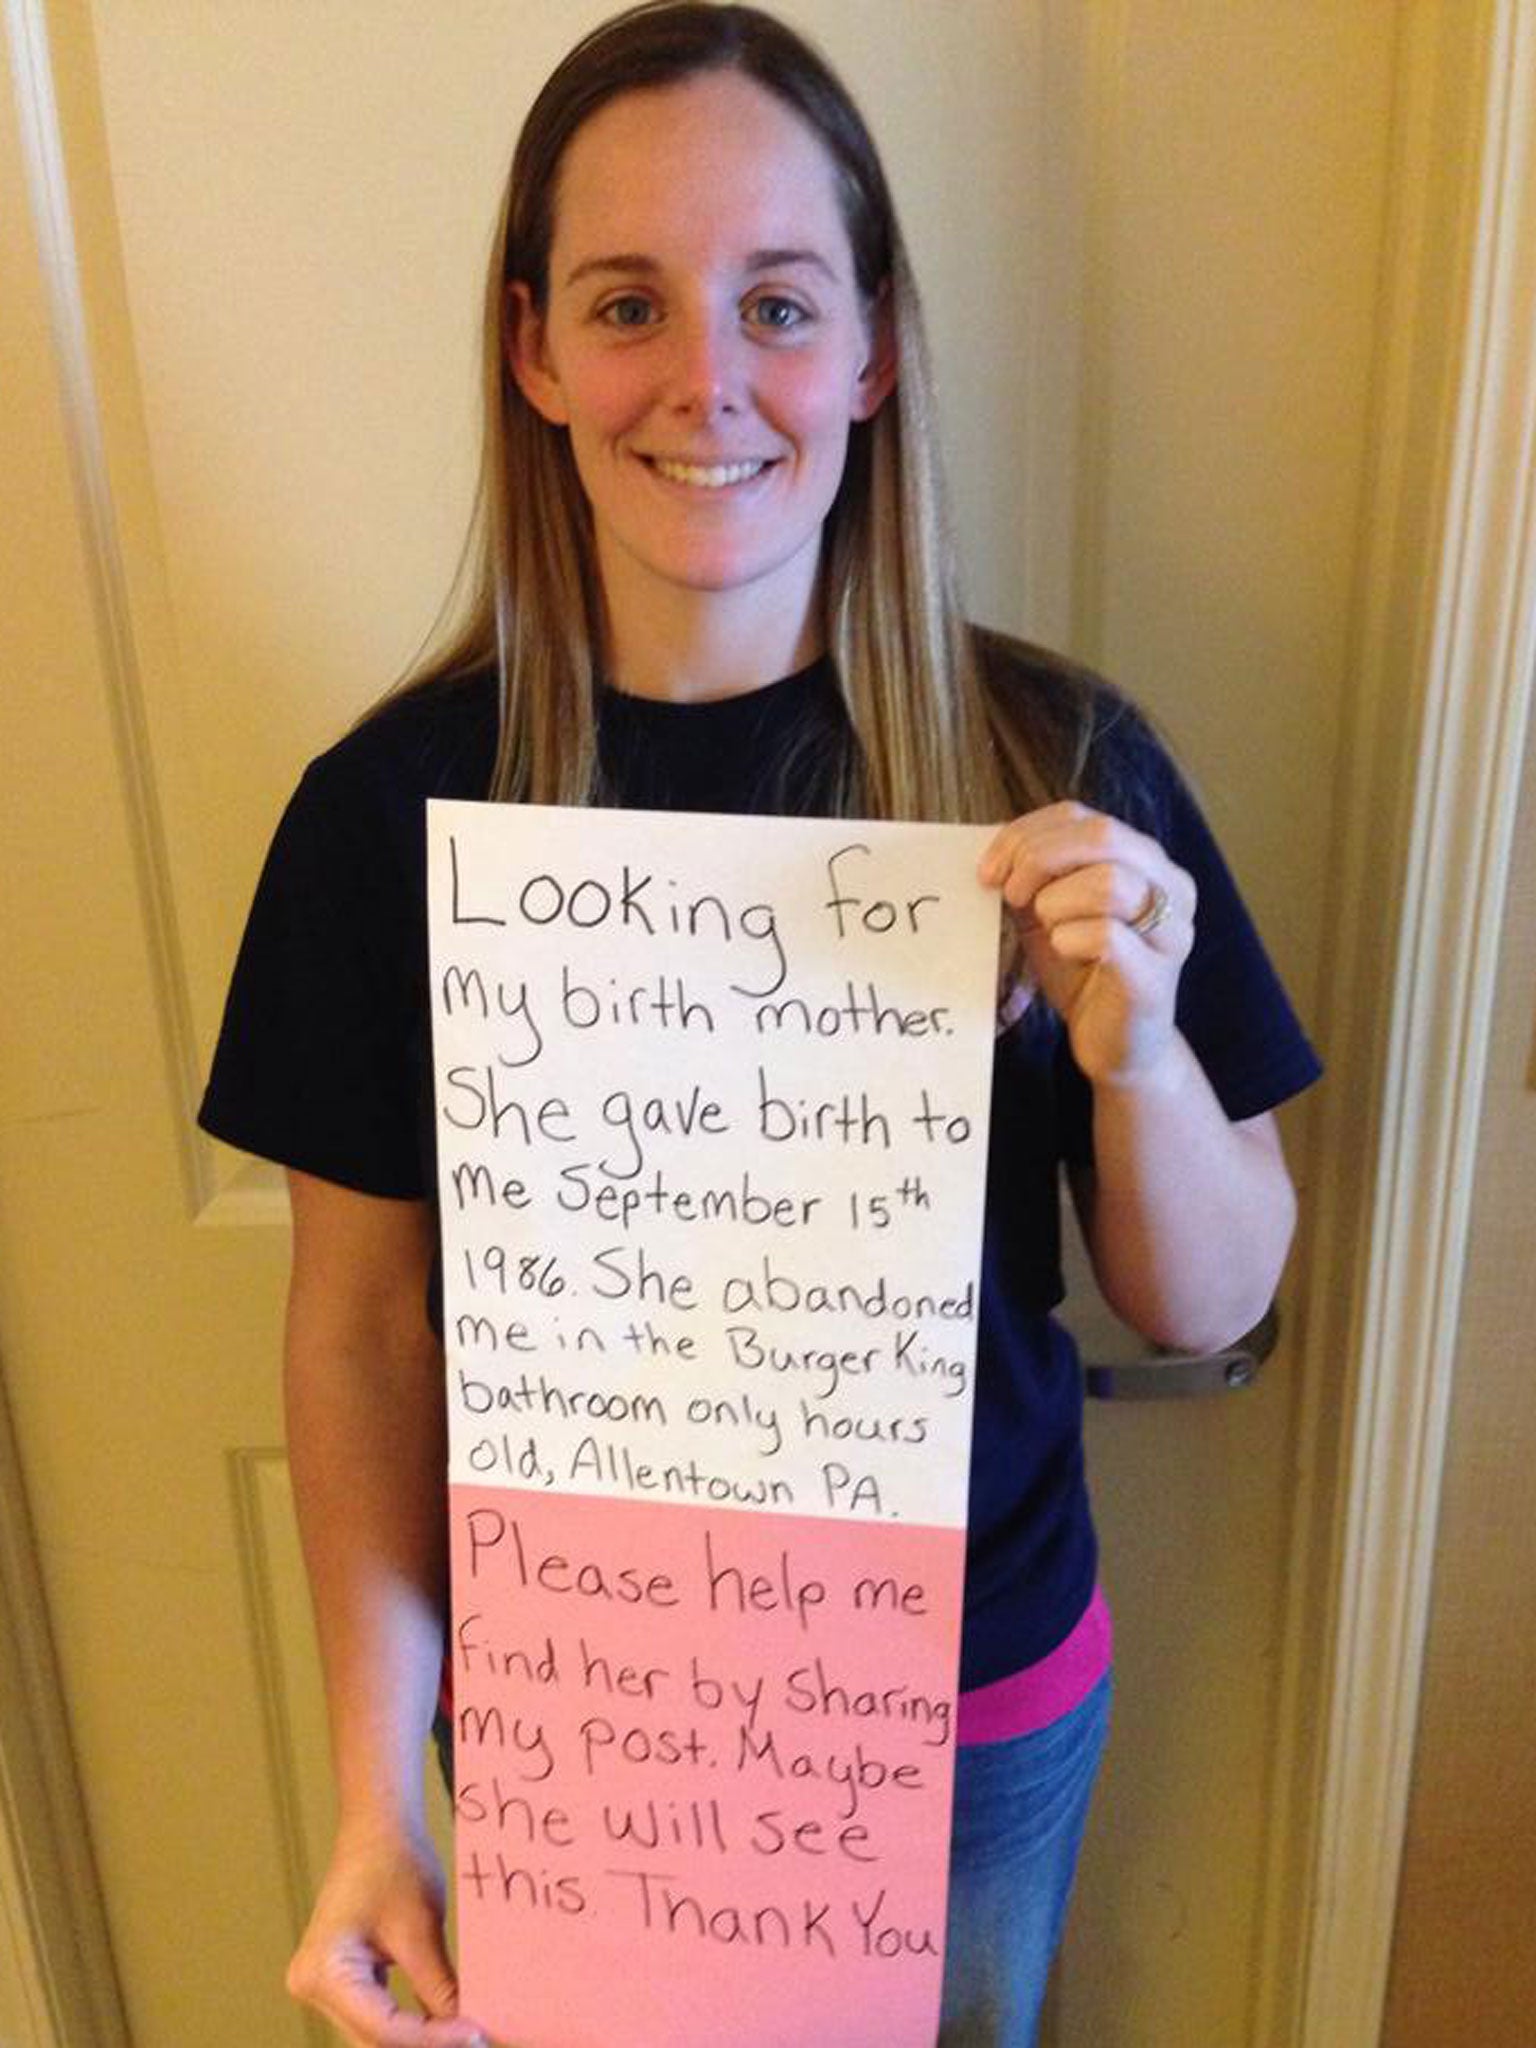 Ms Deprill became known as the Burger King baby after posting a photo on her Facebook page on 2 March where she held up a sign that read: "Looking for my birth mother. ... She abandoned me in the Burger King bathroom only hours old, Allentown PA. Please h